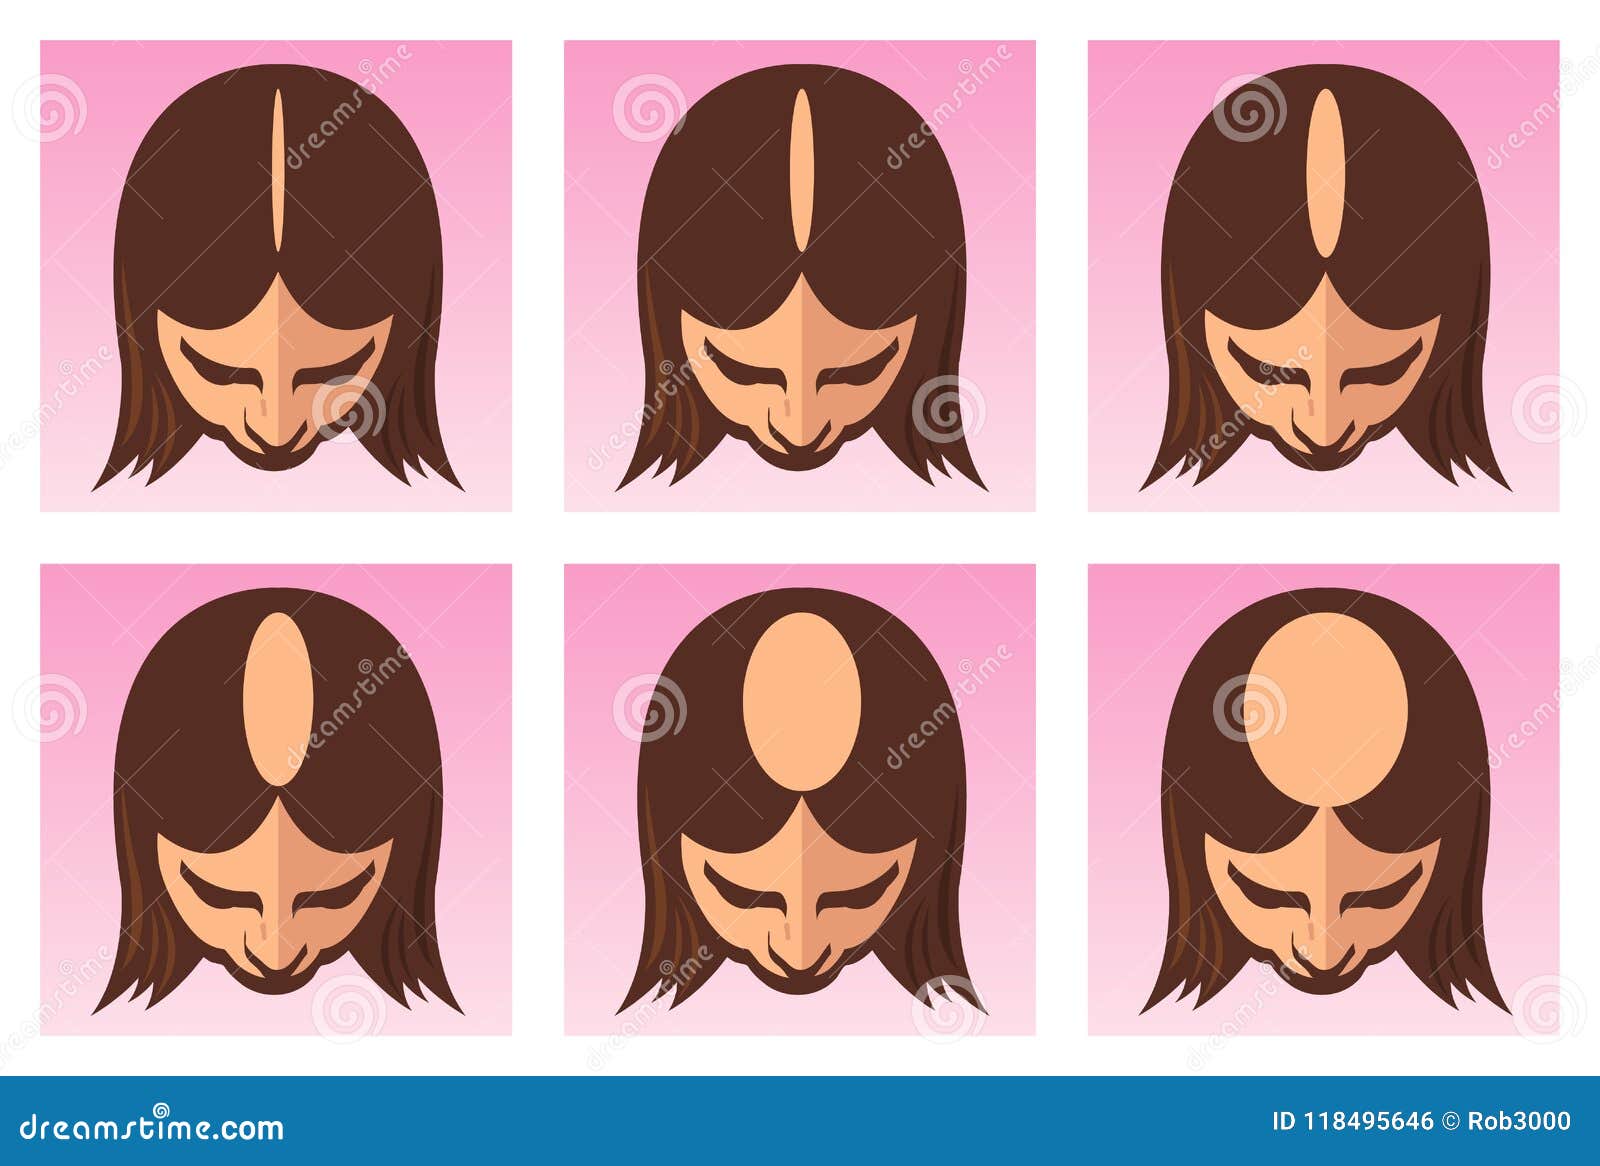 Beautiful Hairstyle Woman Hair Rear View Stock Vector (Royalty Free)  1275399967 | Shutterstock